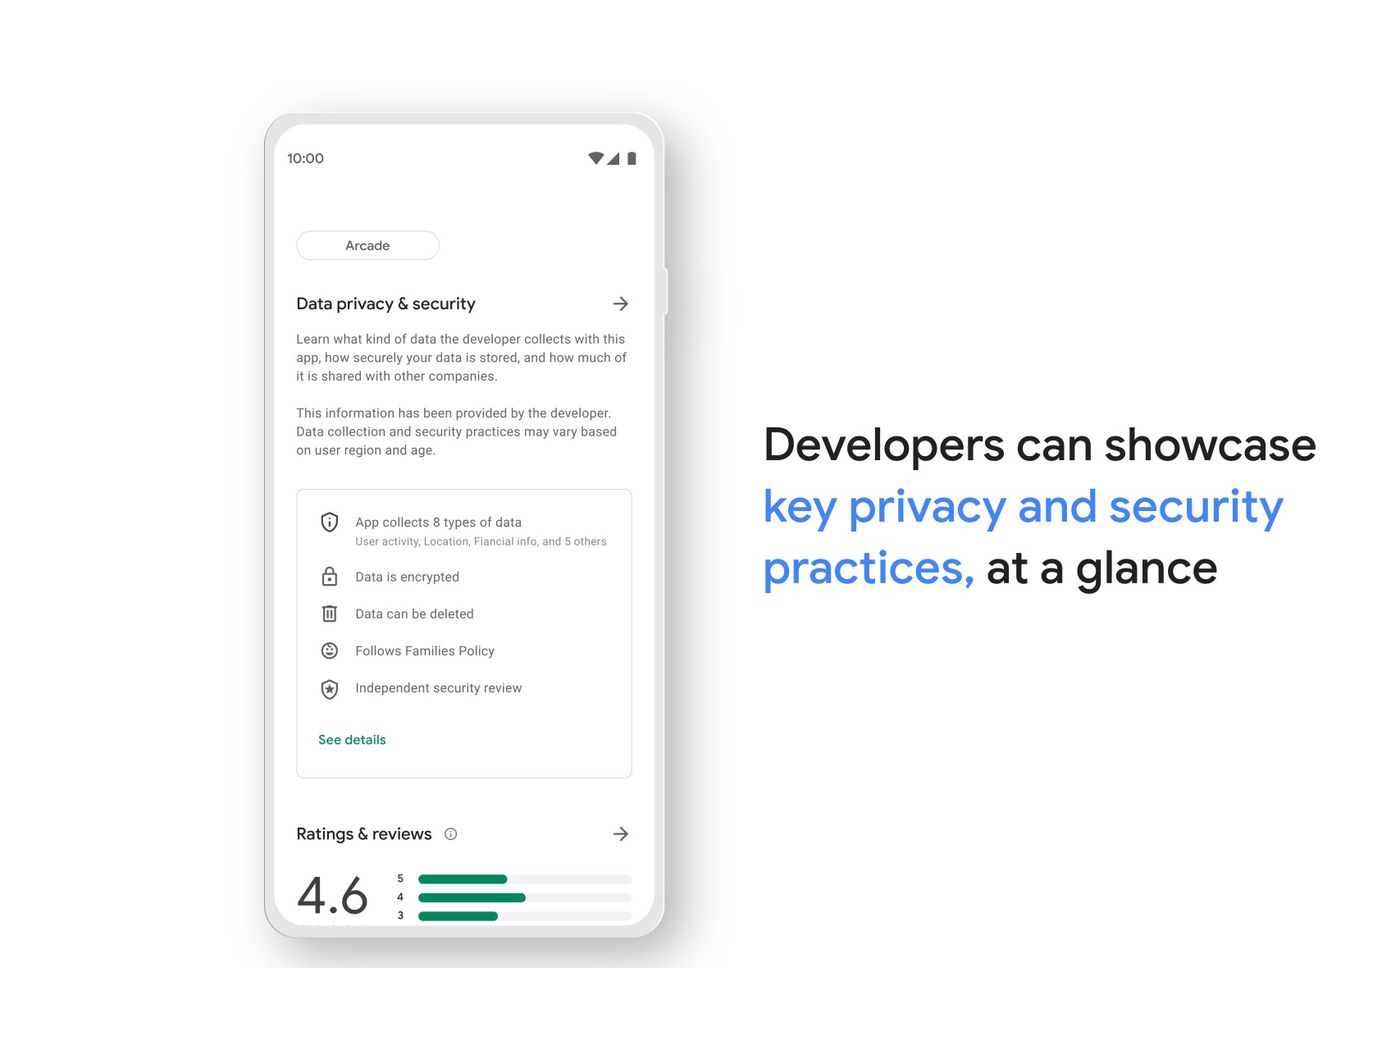 Google shows off Play Store's upcoming data privacy section - The Verge